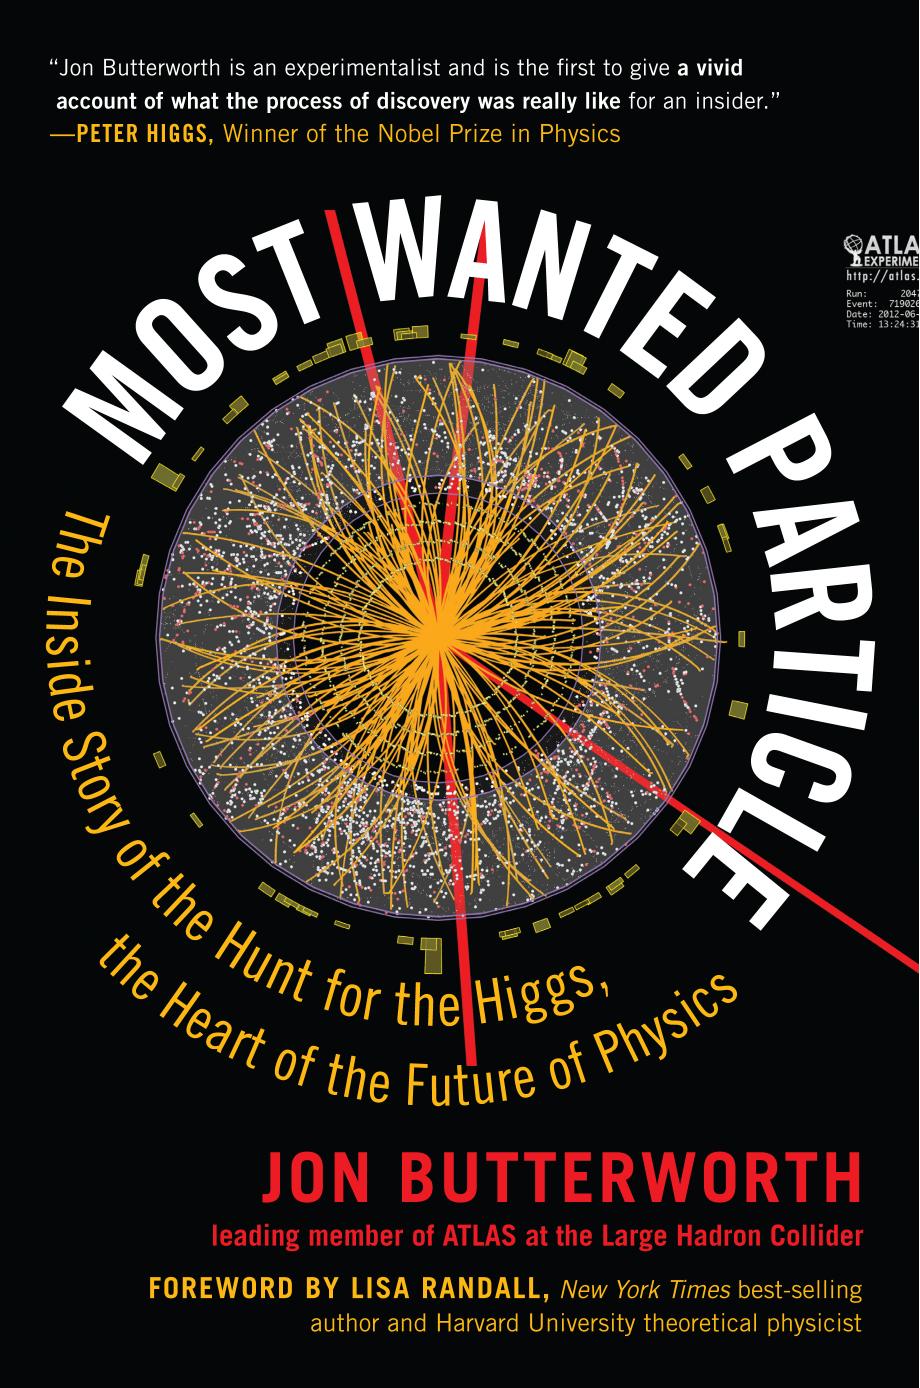 Most Wanted Particle by Jon Butterworth